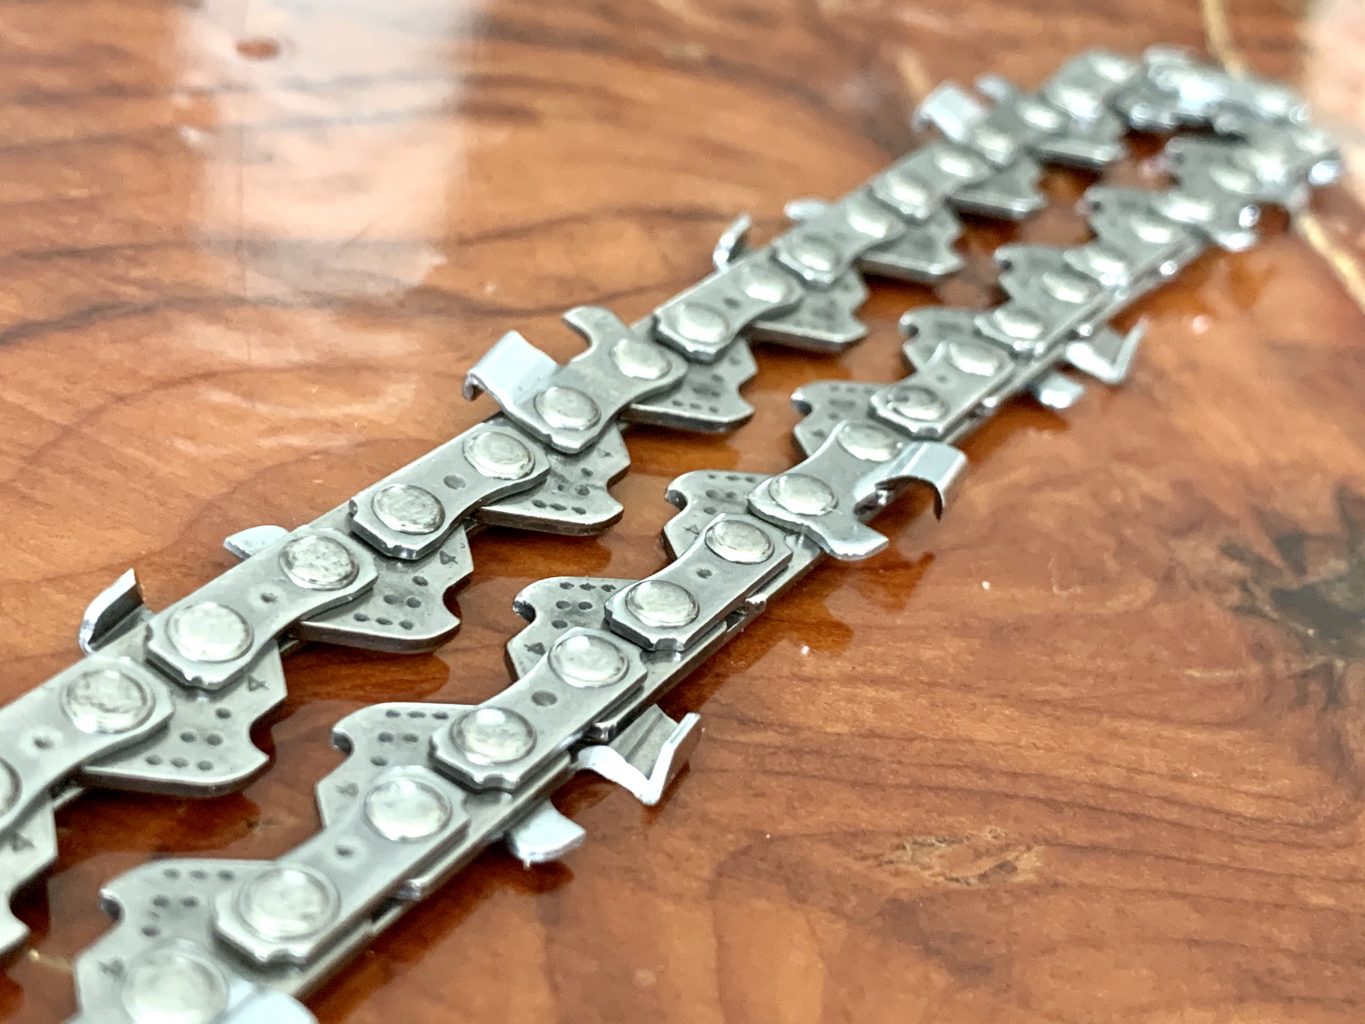 PMC Panther Mini Chain 1/4 .043 72 Drive Link Chain for 14"[35cm] Panther Mini Bars